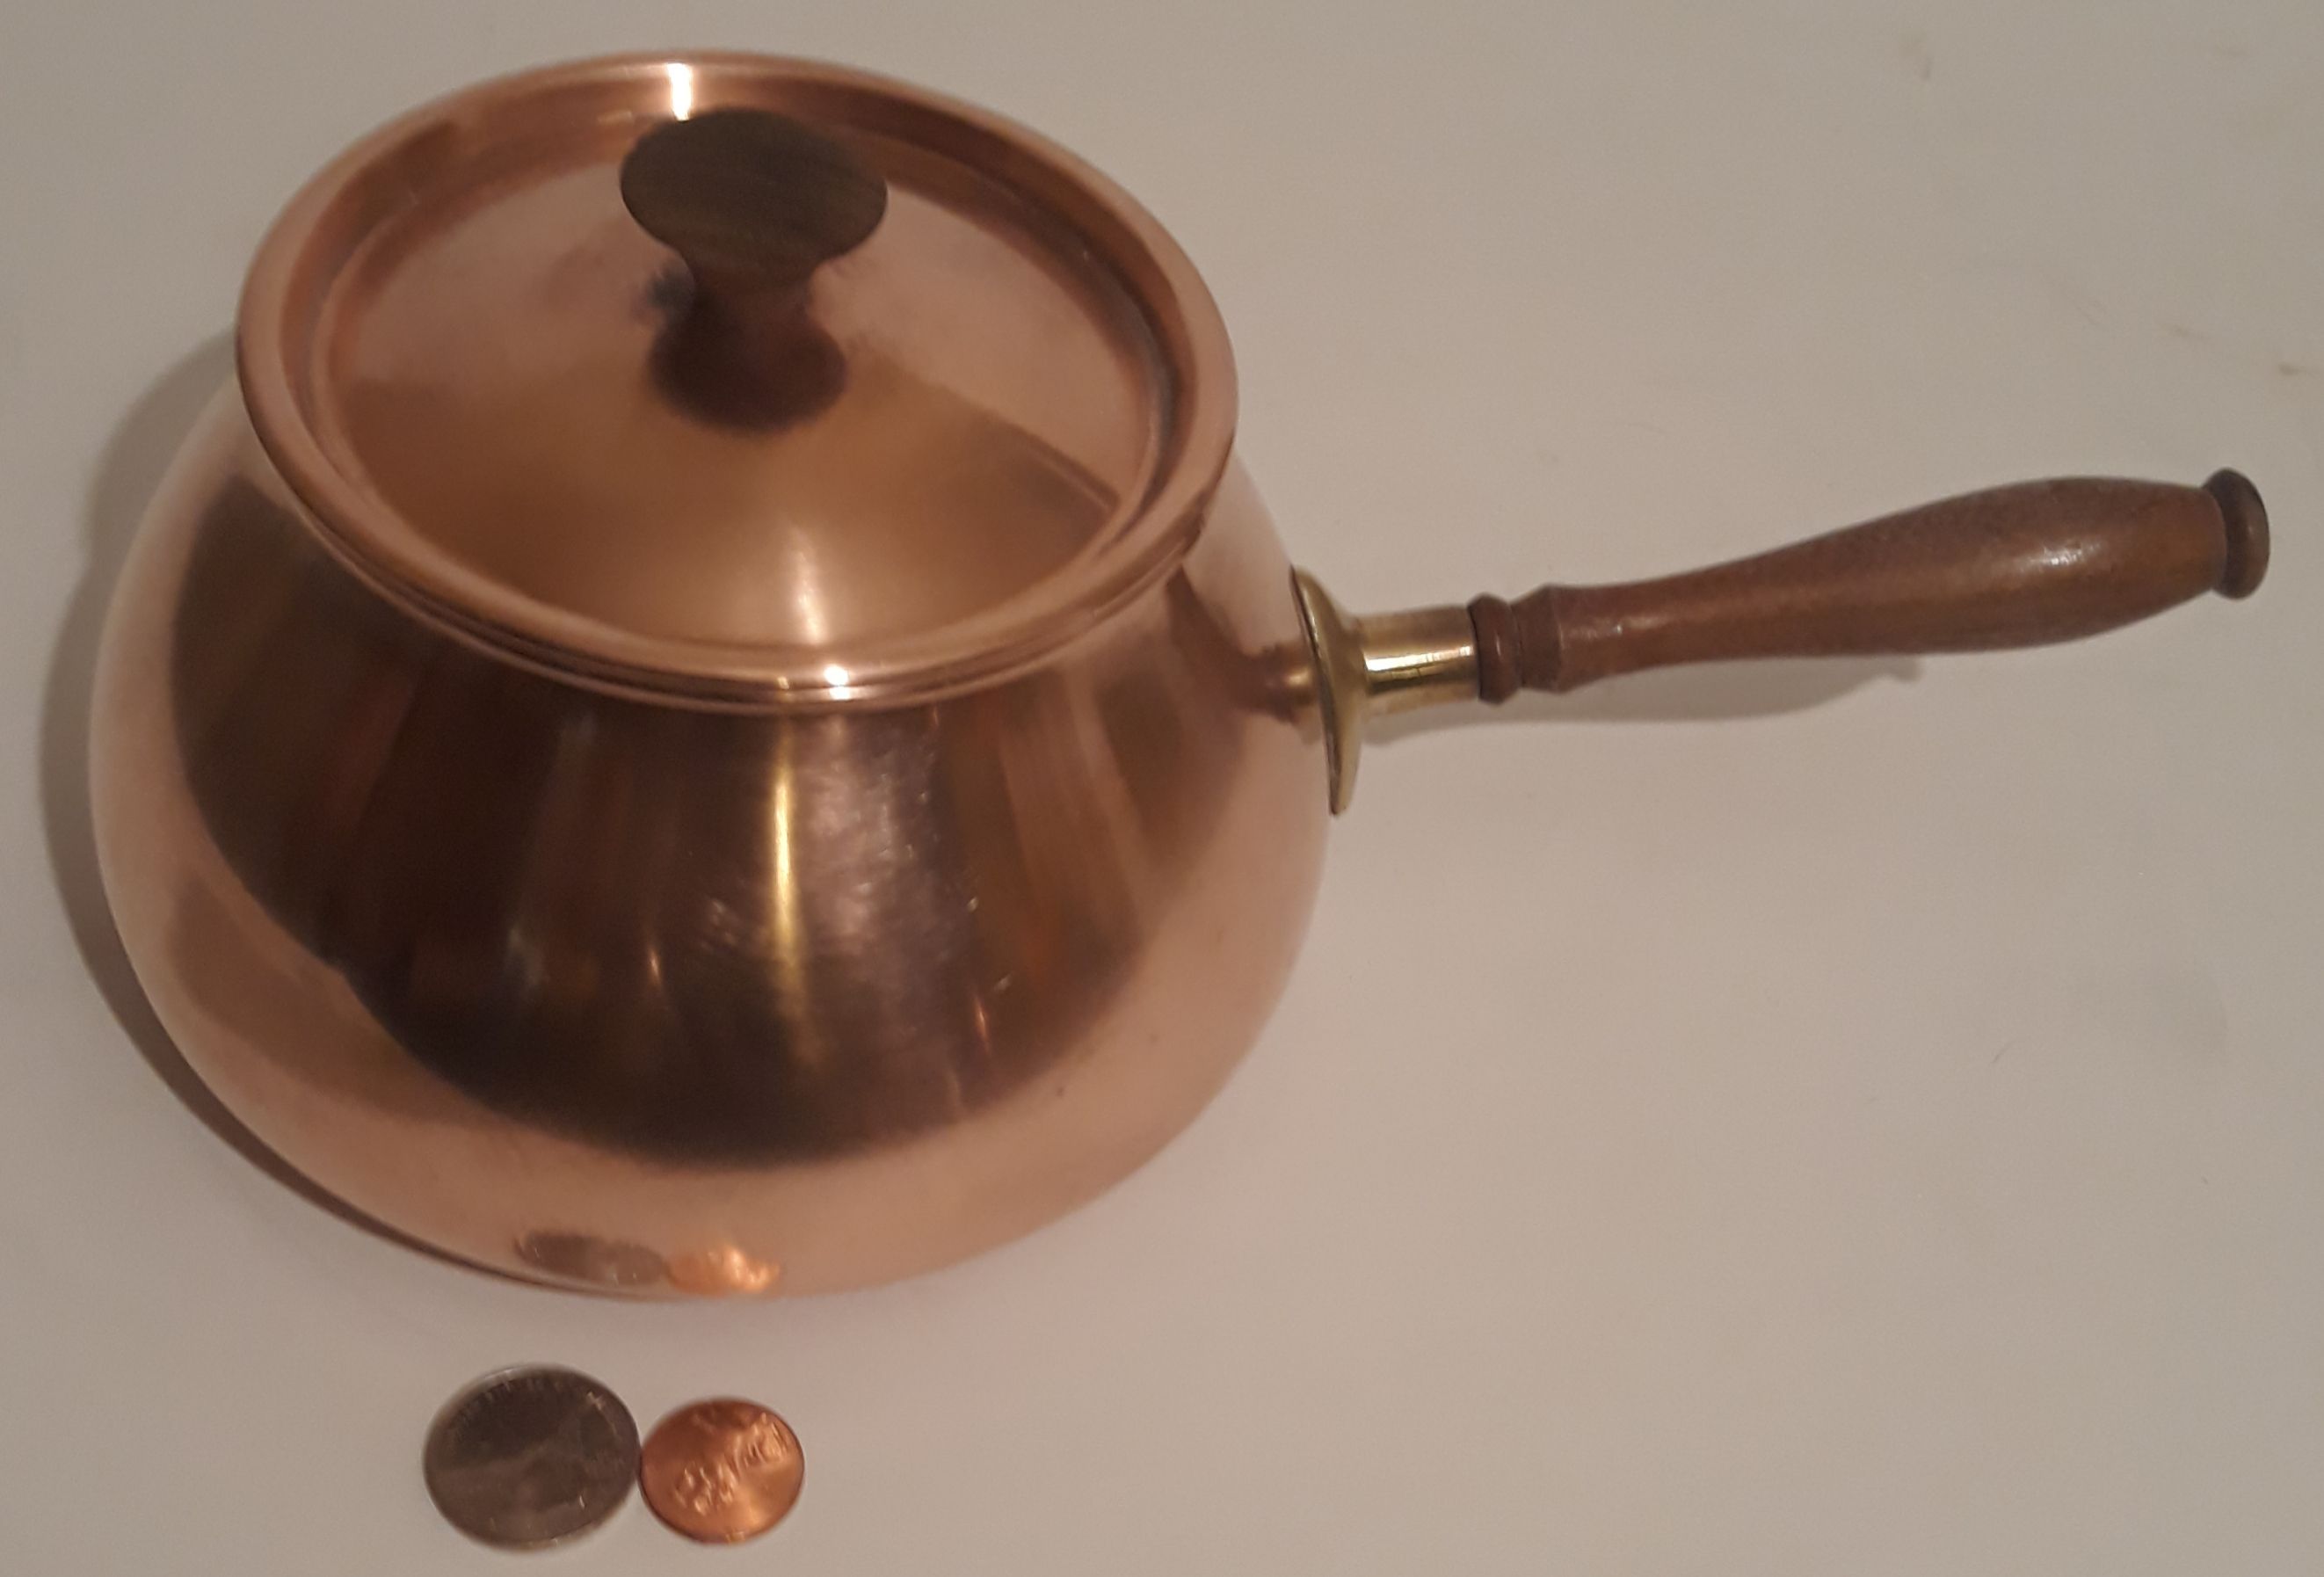 Vintage Metal Copper and Brass Cooking Pot, Lid, Wooden Handle, Made in Portugal, 11" Long and 6" x 3 1/2" Pan Size, Home Decor, Shelf Display